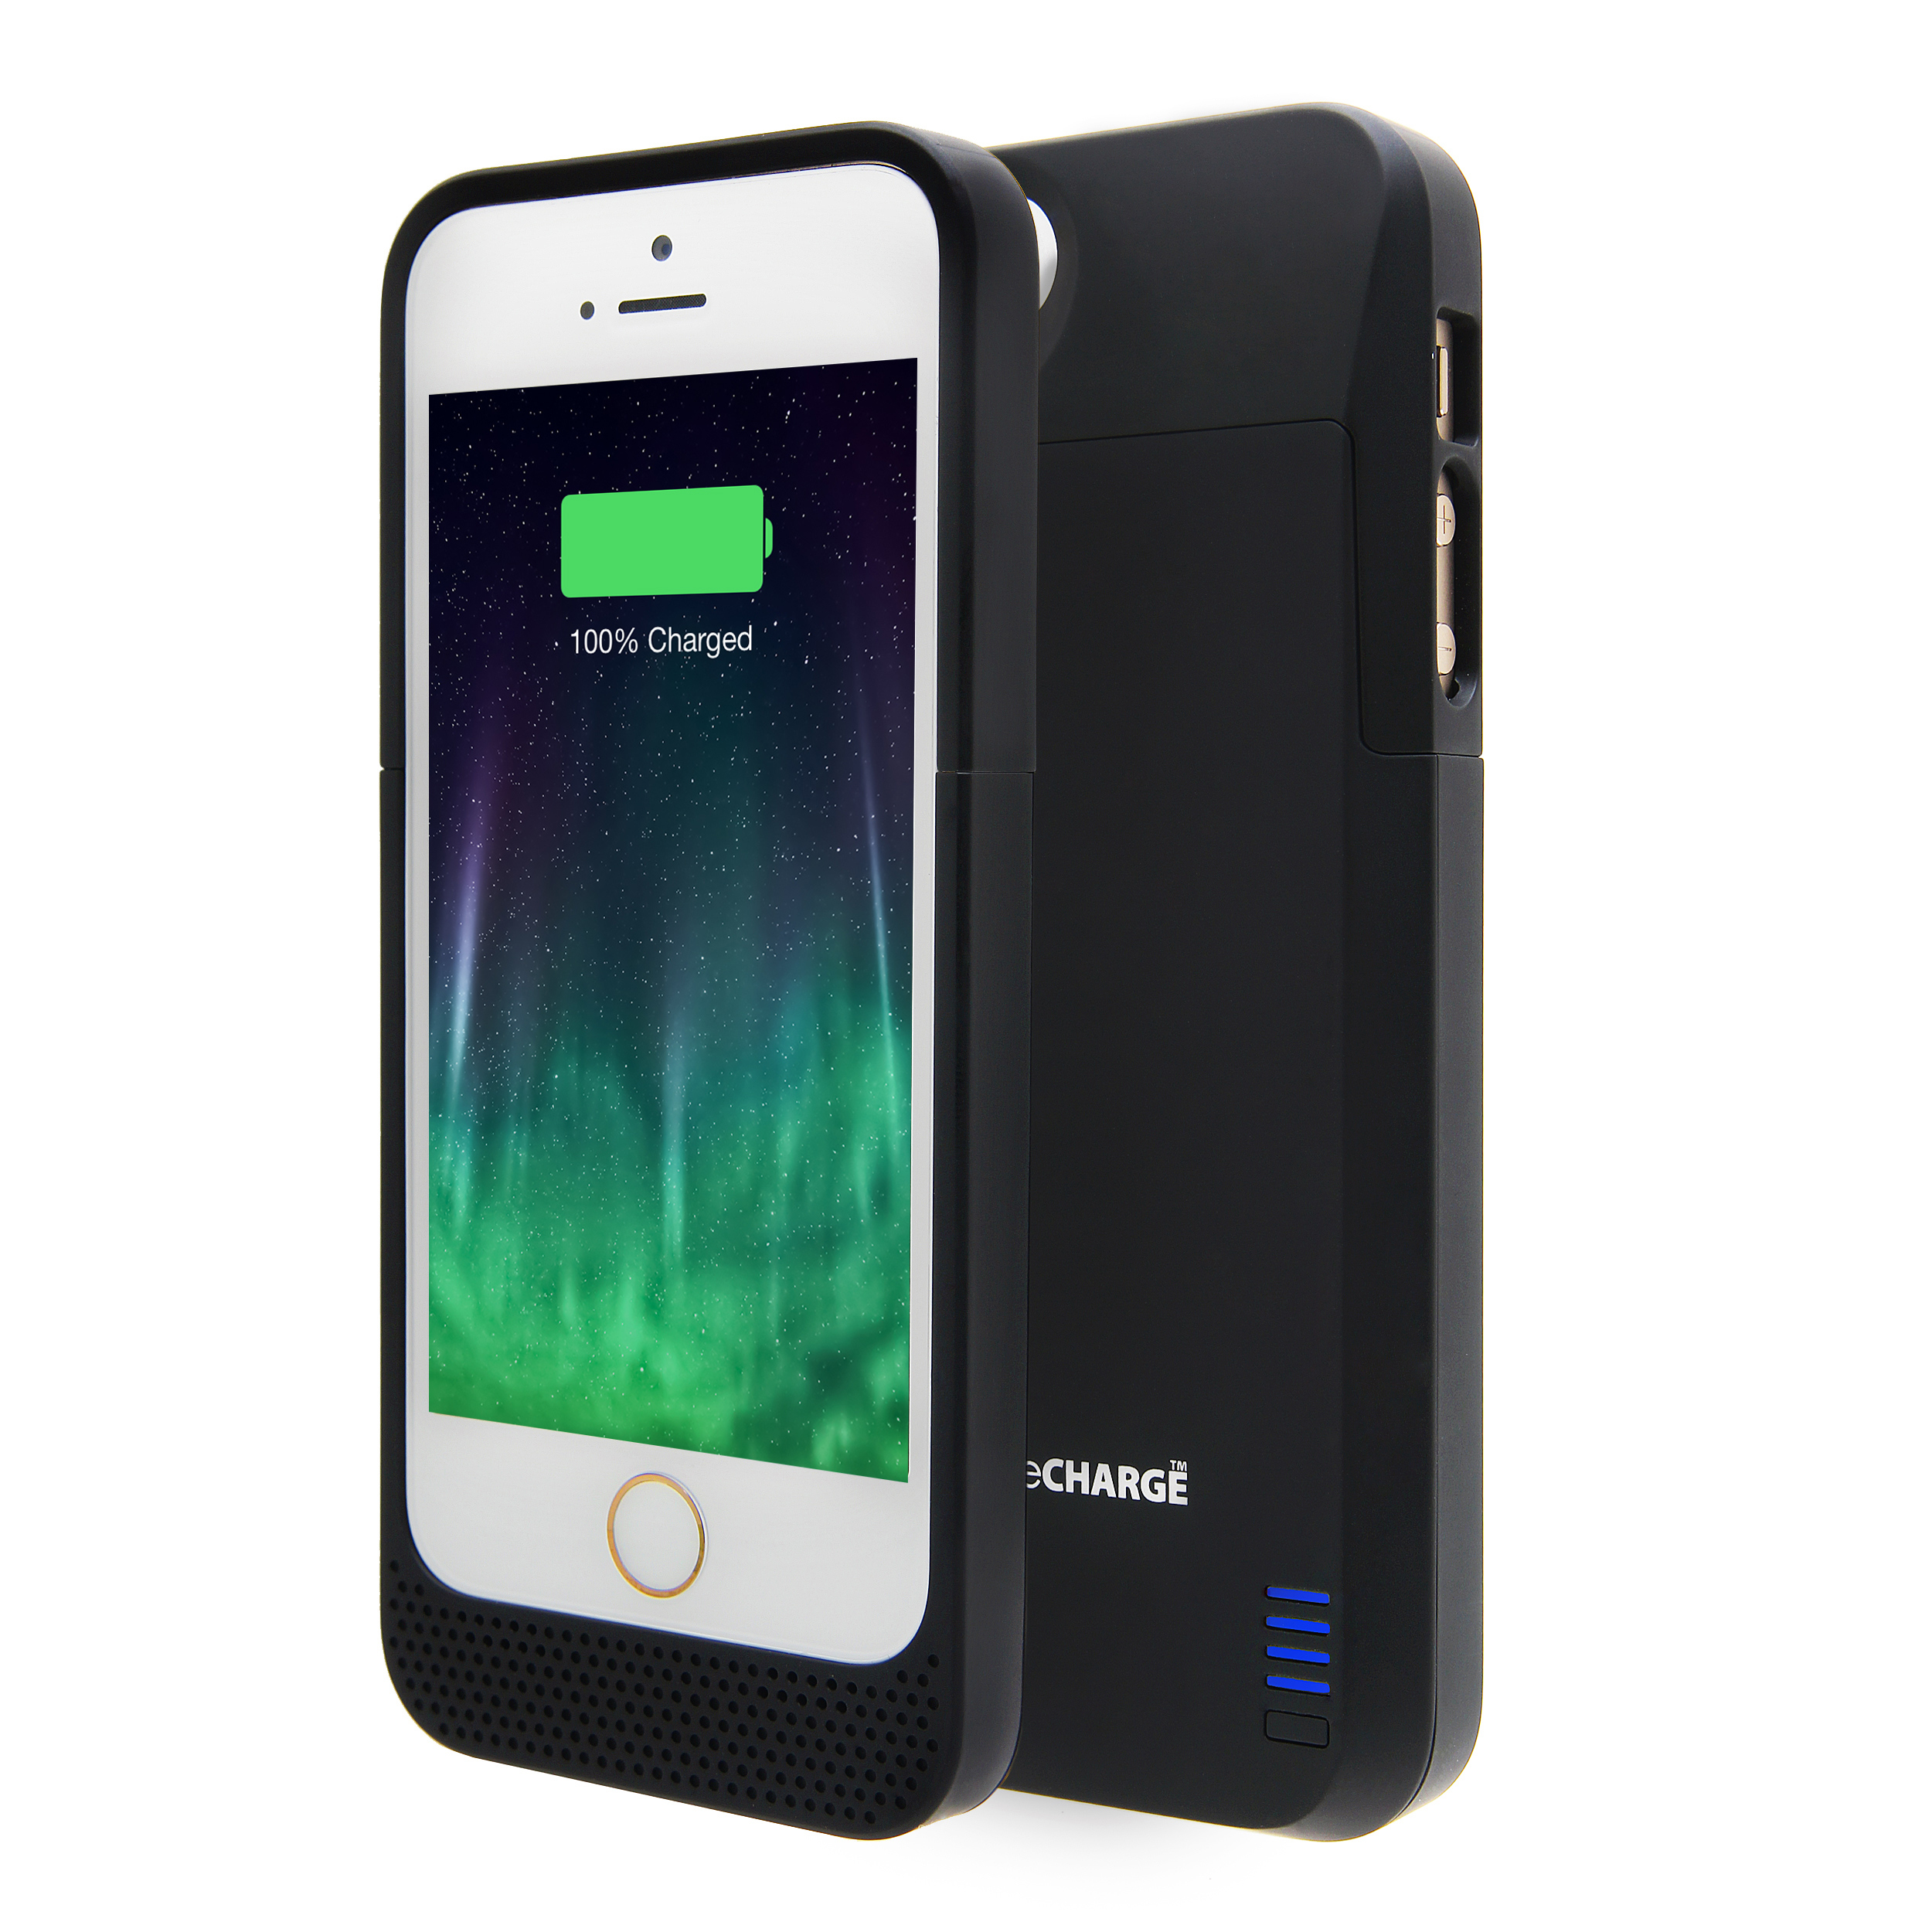 LifeCHARGE iPhone 5/5s battery case